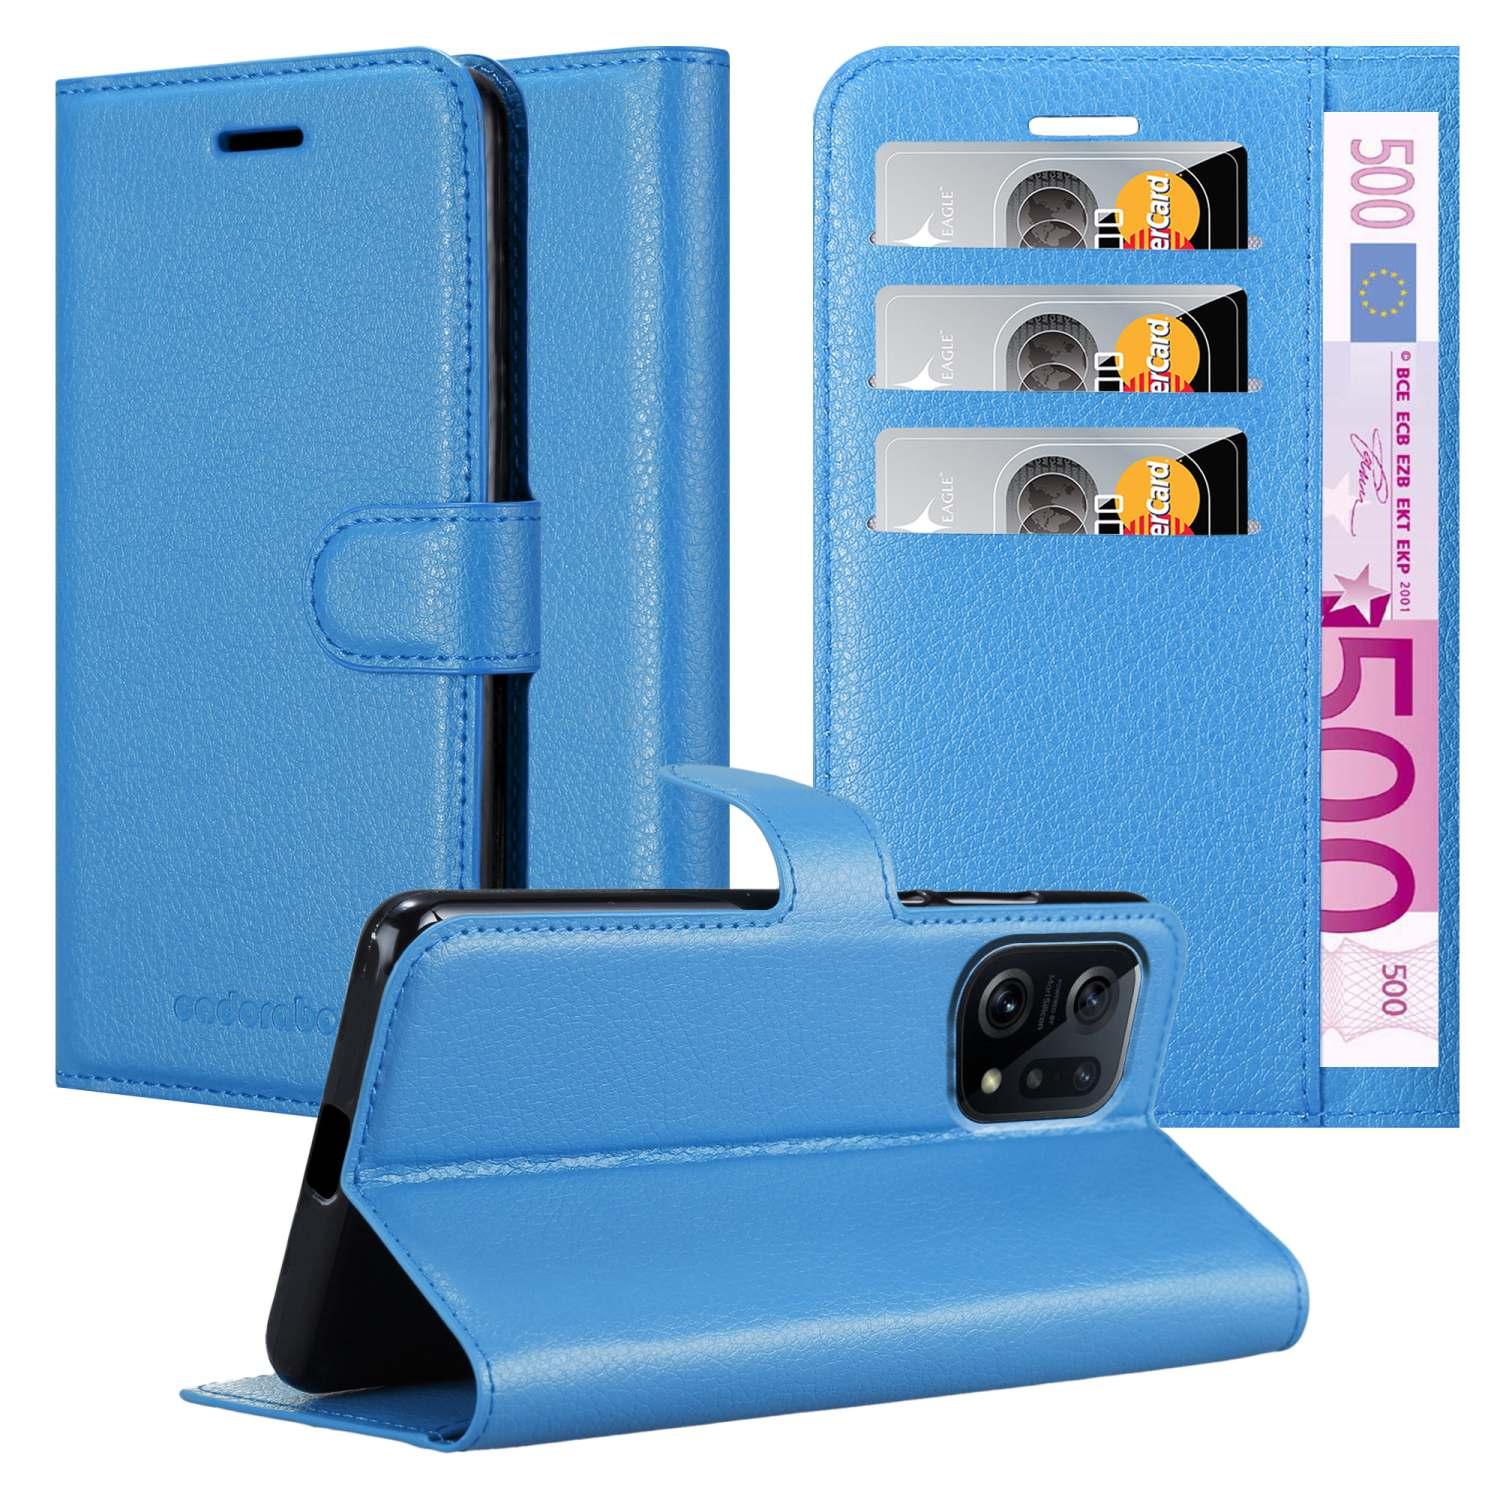 Bookcover, PASTELL BLAU FIND CADORABO Oppo, Standfunktion, X5, Hülle Book